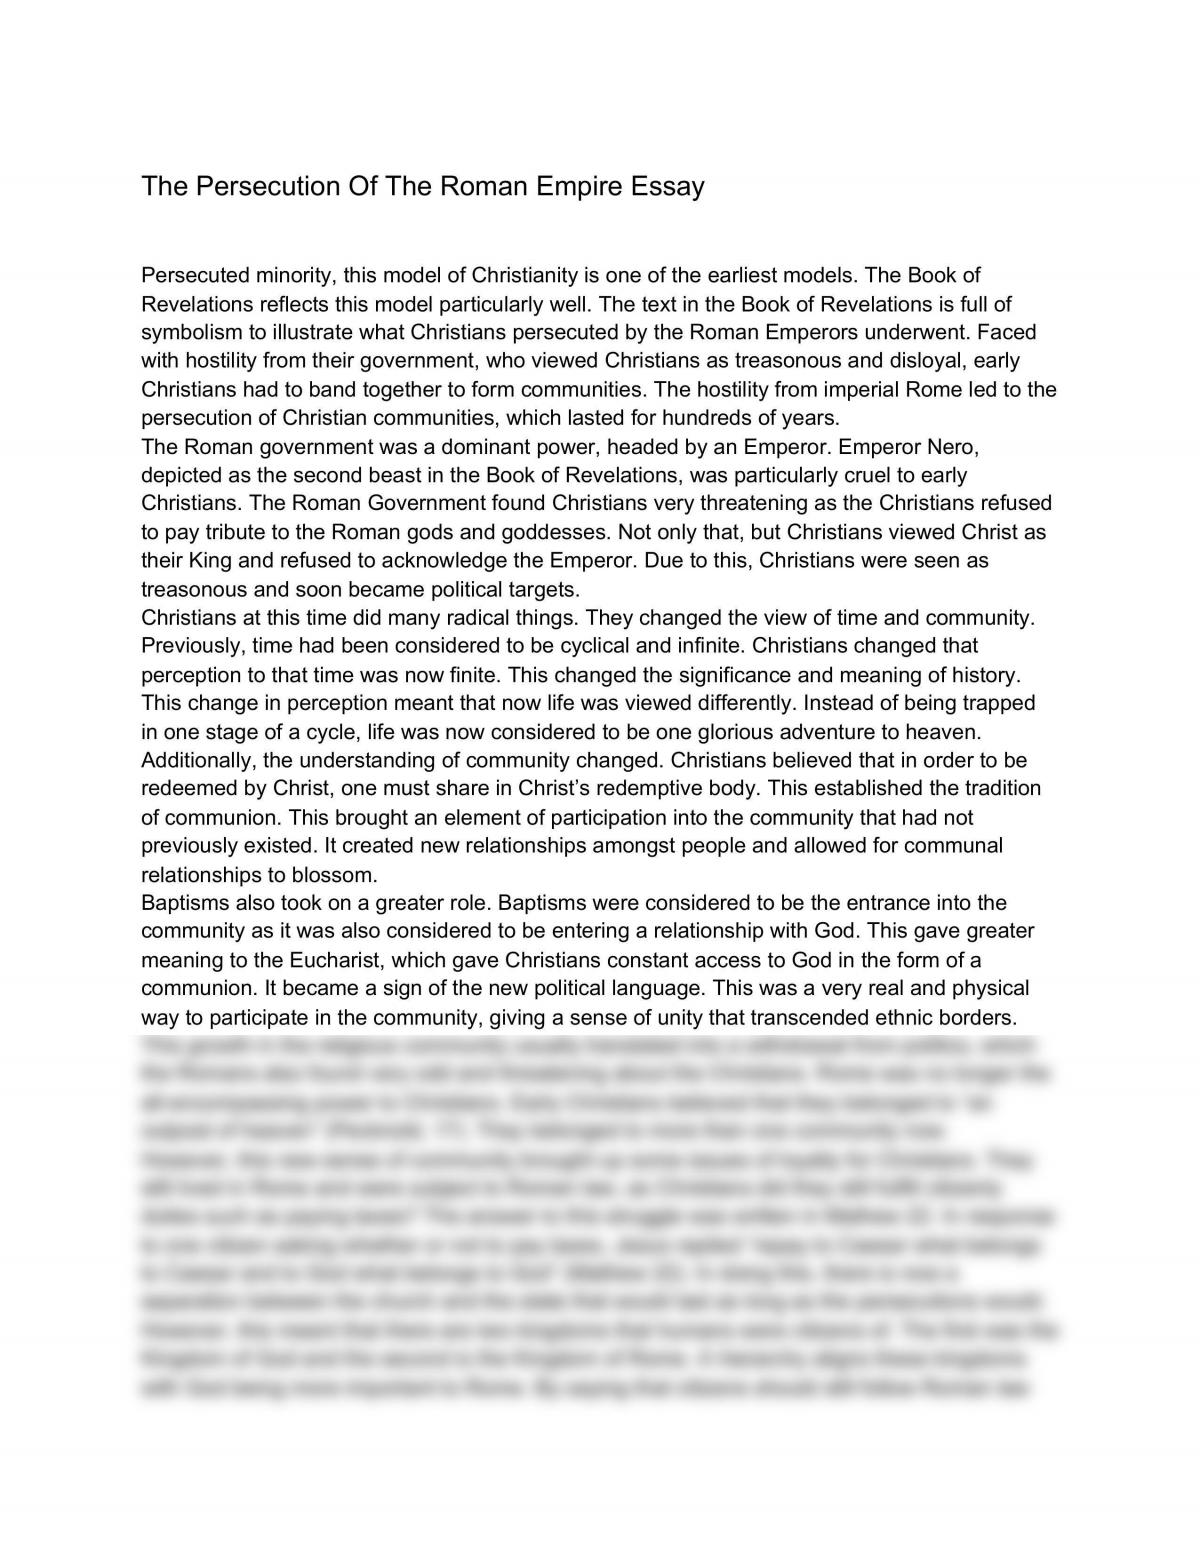 The Persecution Of The Roman Empire Essay - Page 1